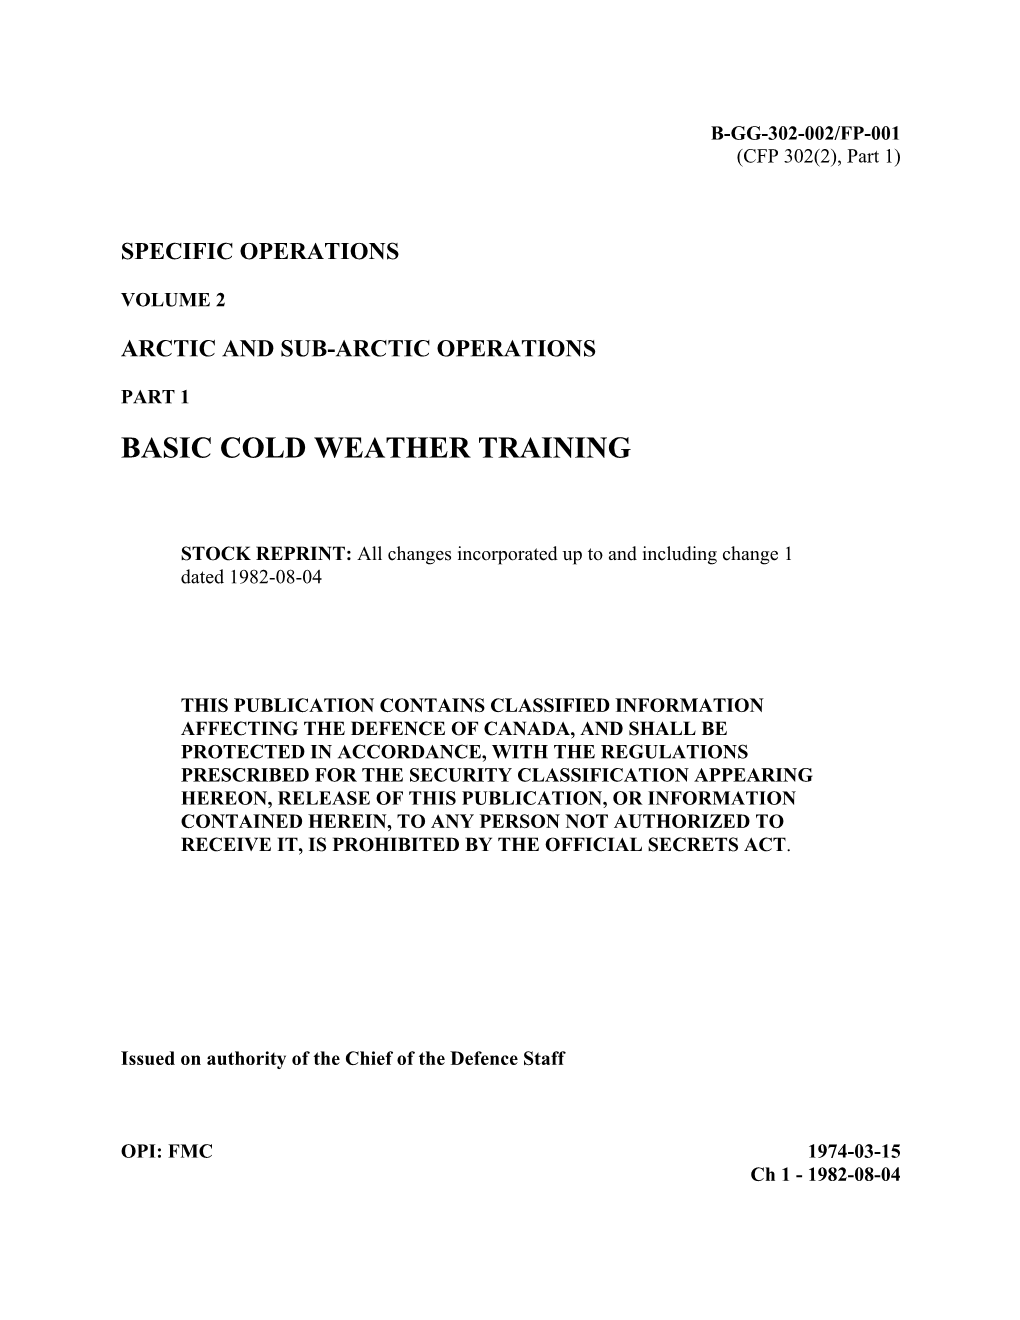 Specific Operations Volume 2 Arctic and Sub-Arctic Operations Part 1 Basic Cold Weather Trainingarctic and Subarctic Operations